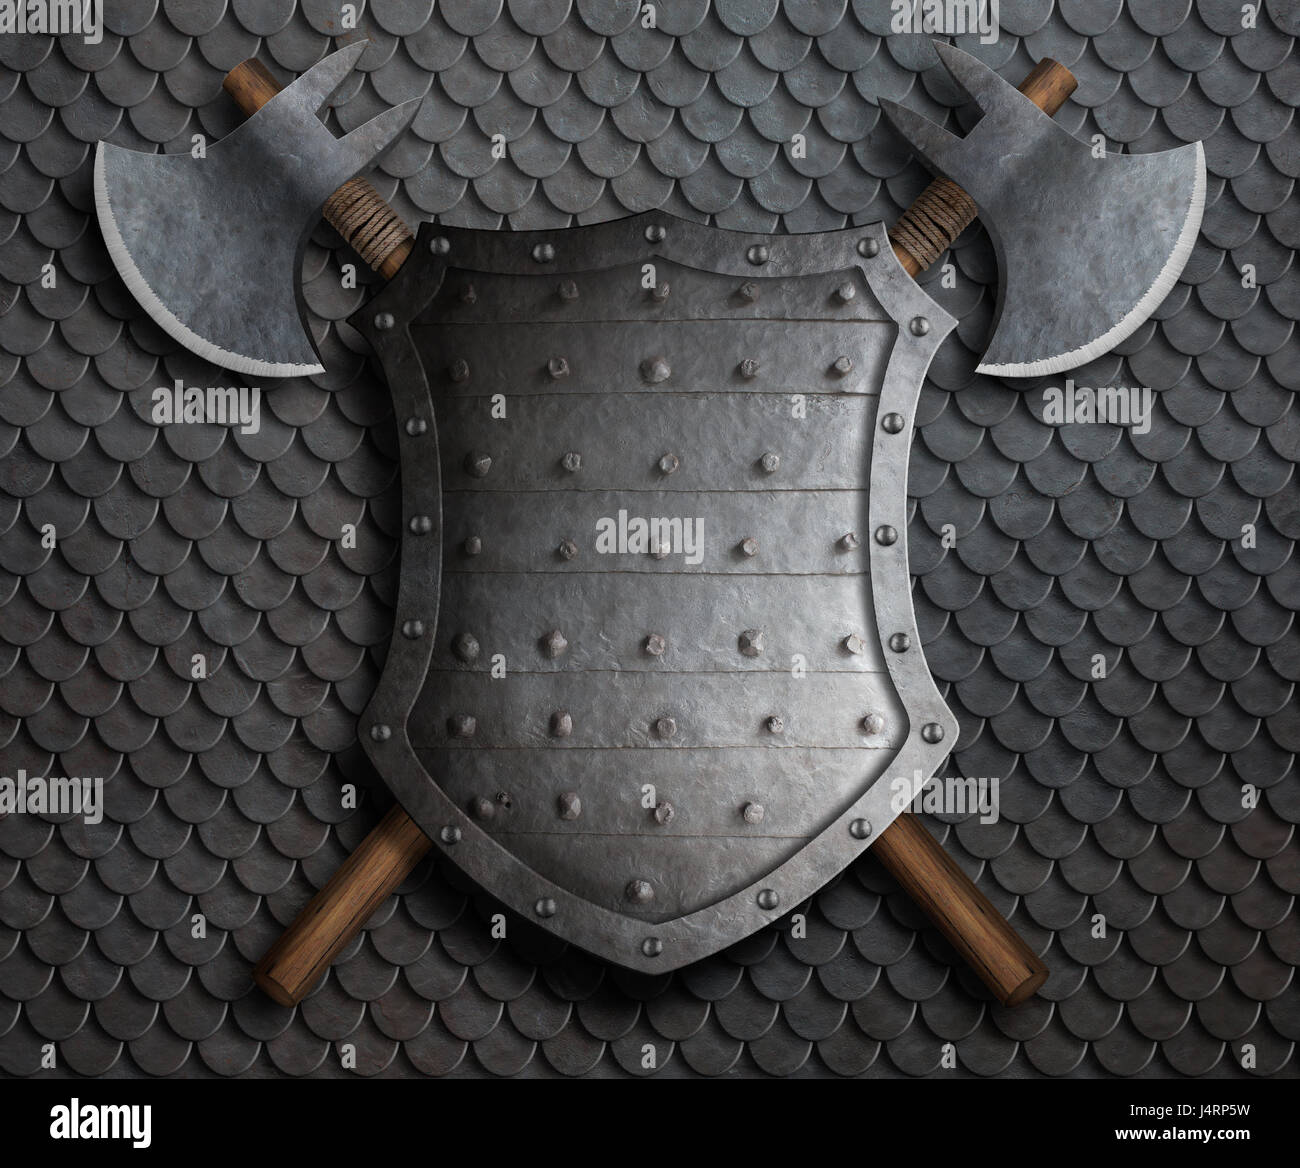 metal spiked shield and two crossed battle axes on armor 3d illustration Stock Photo